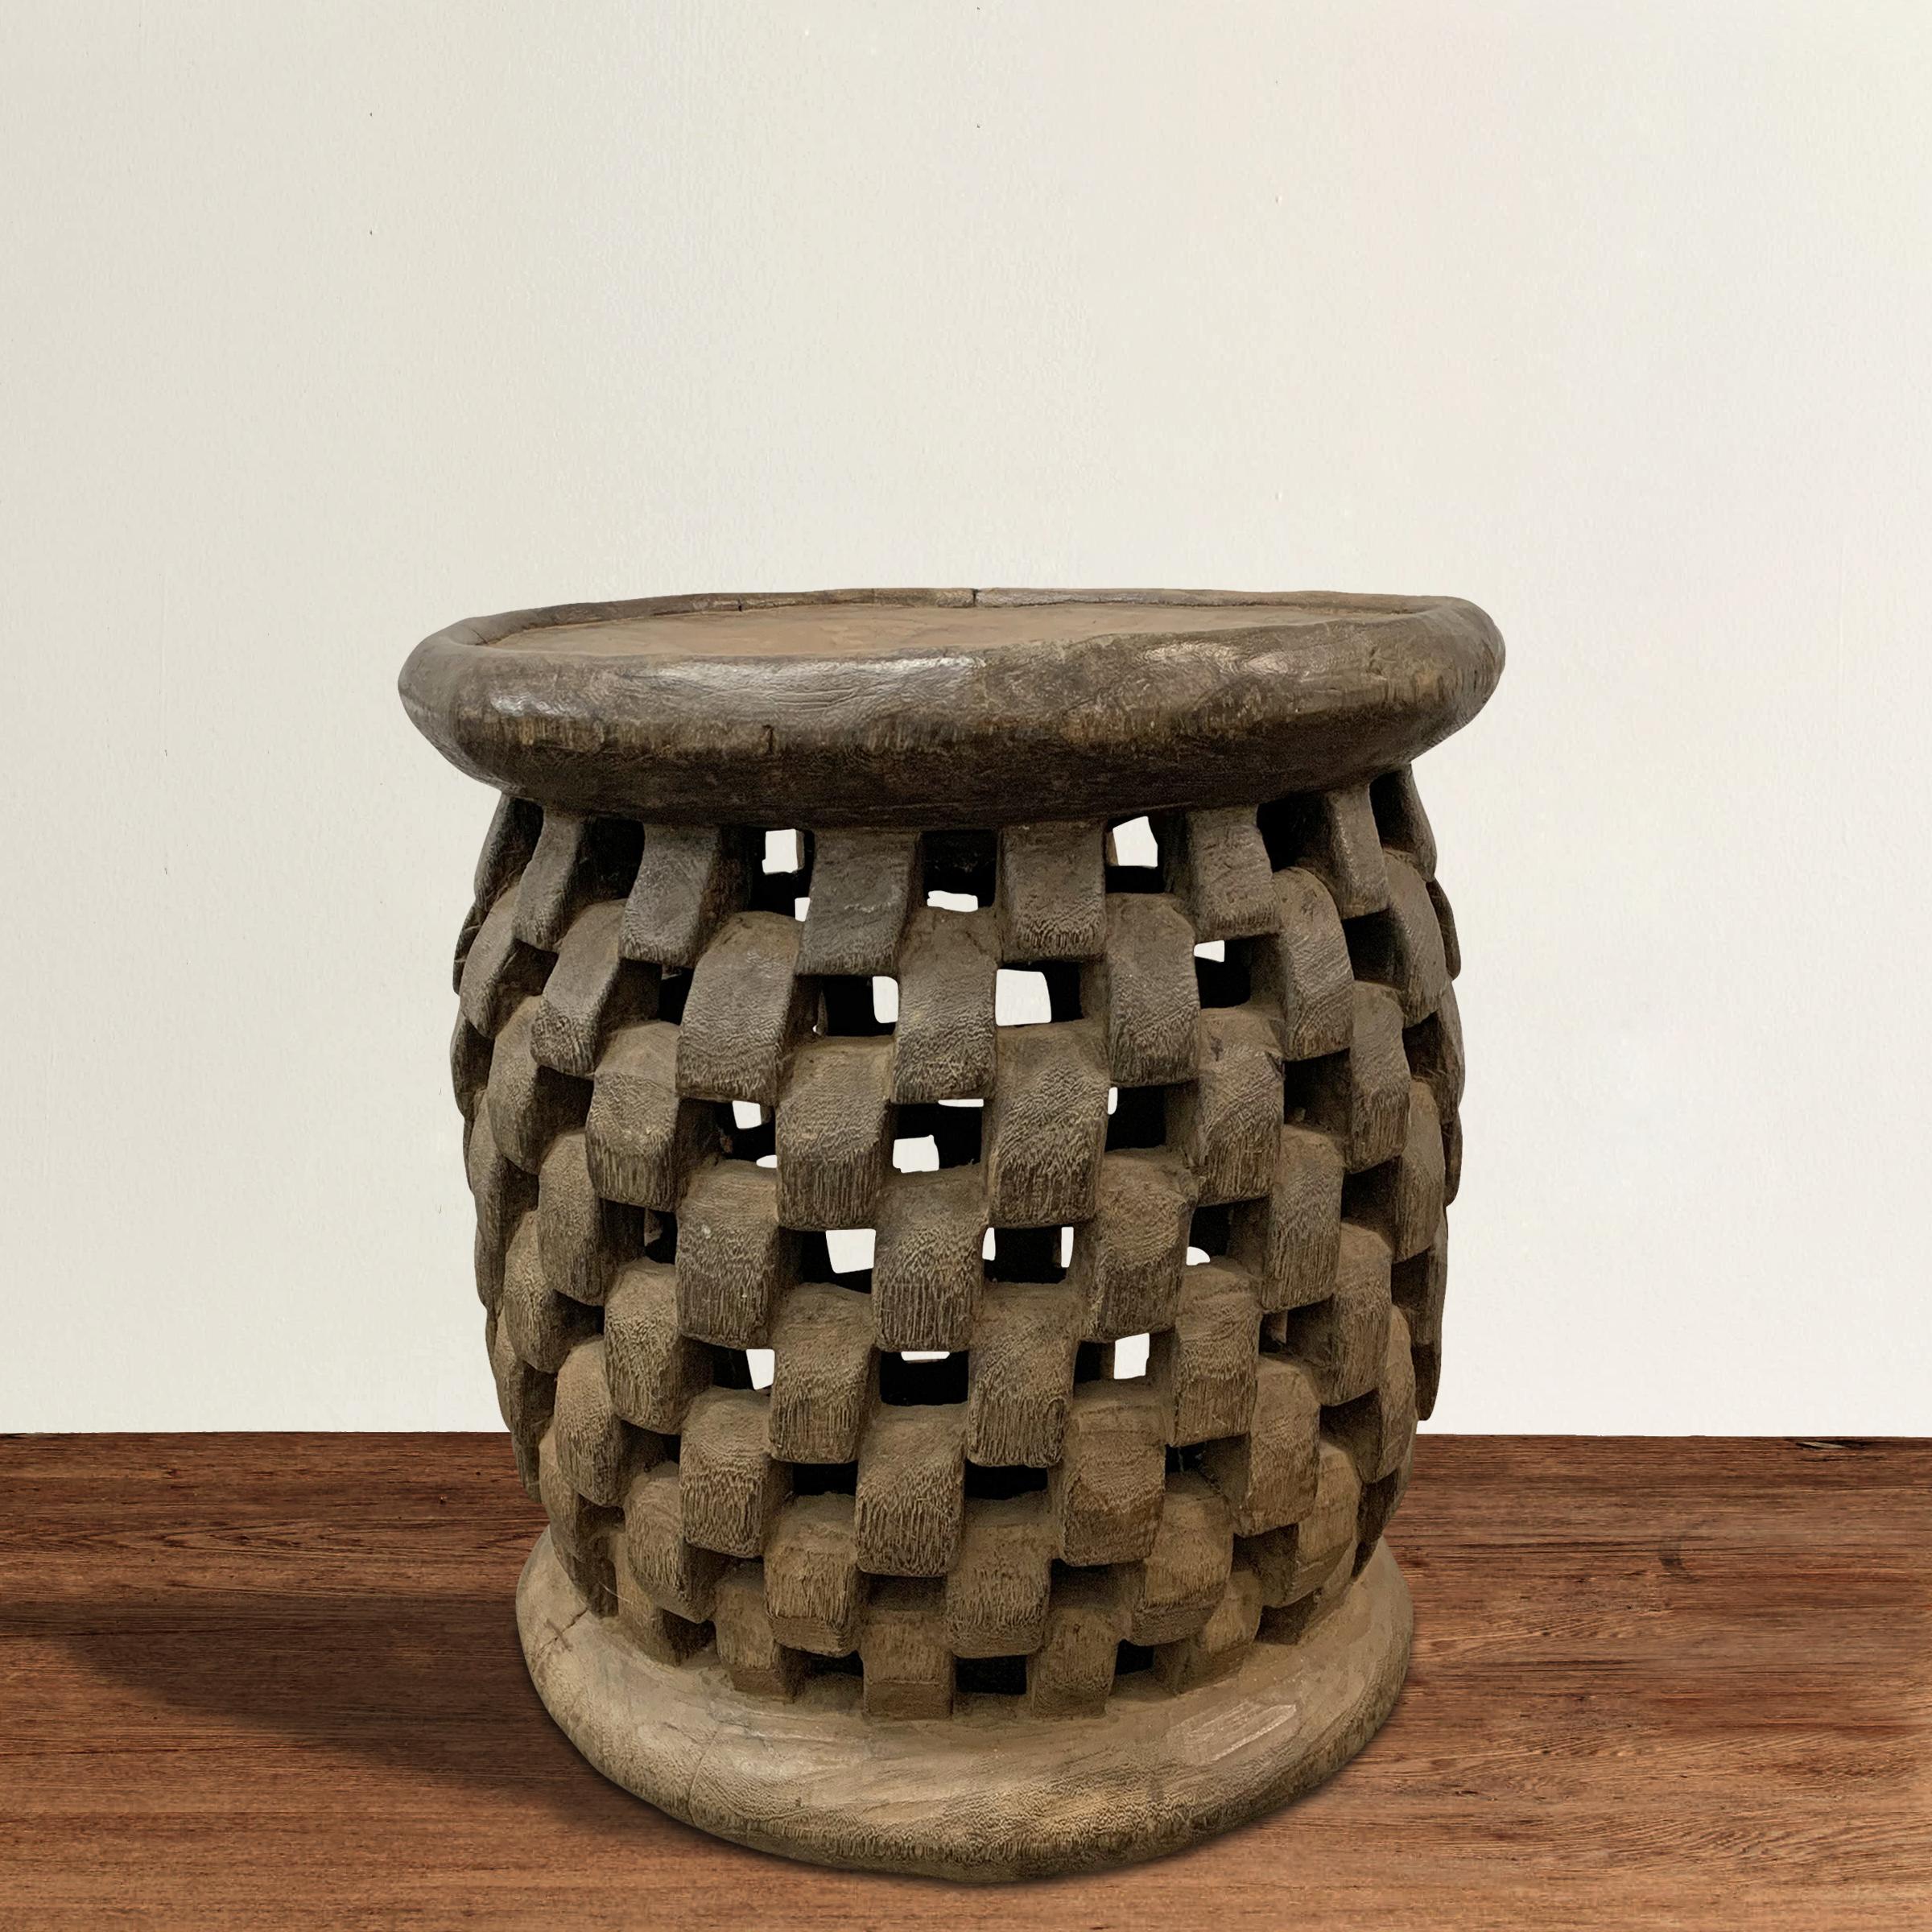 An outstanding early 20th century Bamileke stool hand carved of one piece of wood with a mesmerizing 